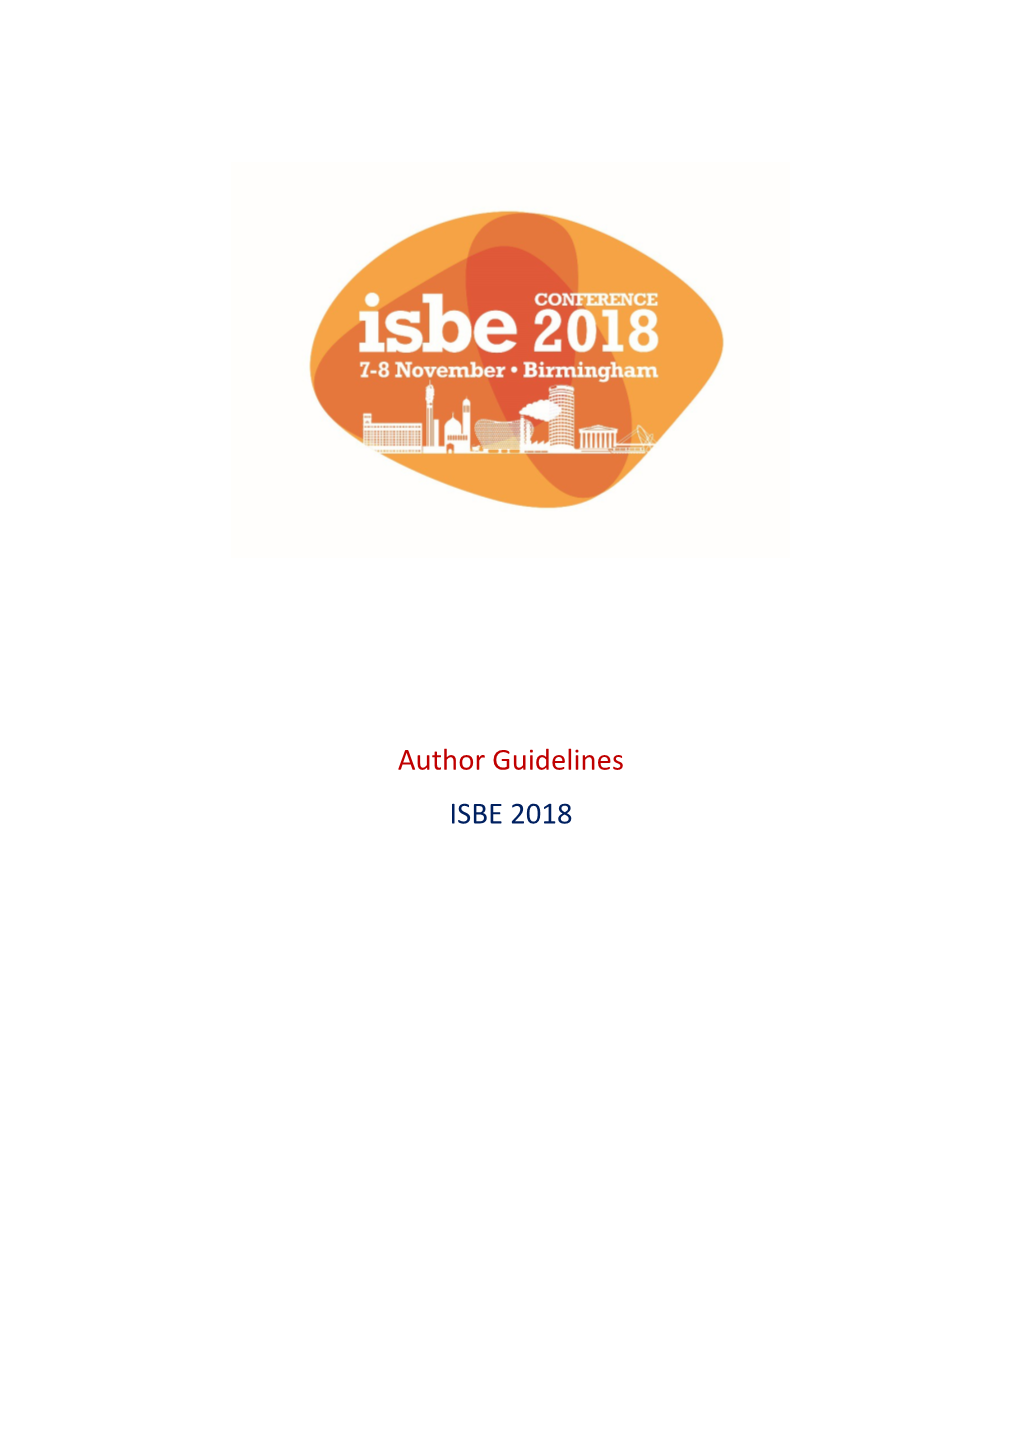 Submitting an Abstract for Review for the ISBE 2018 Conference